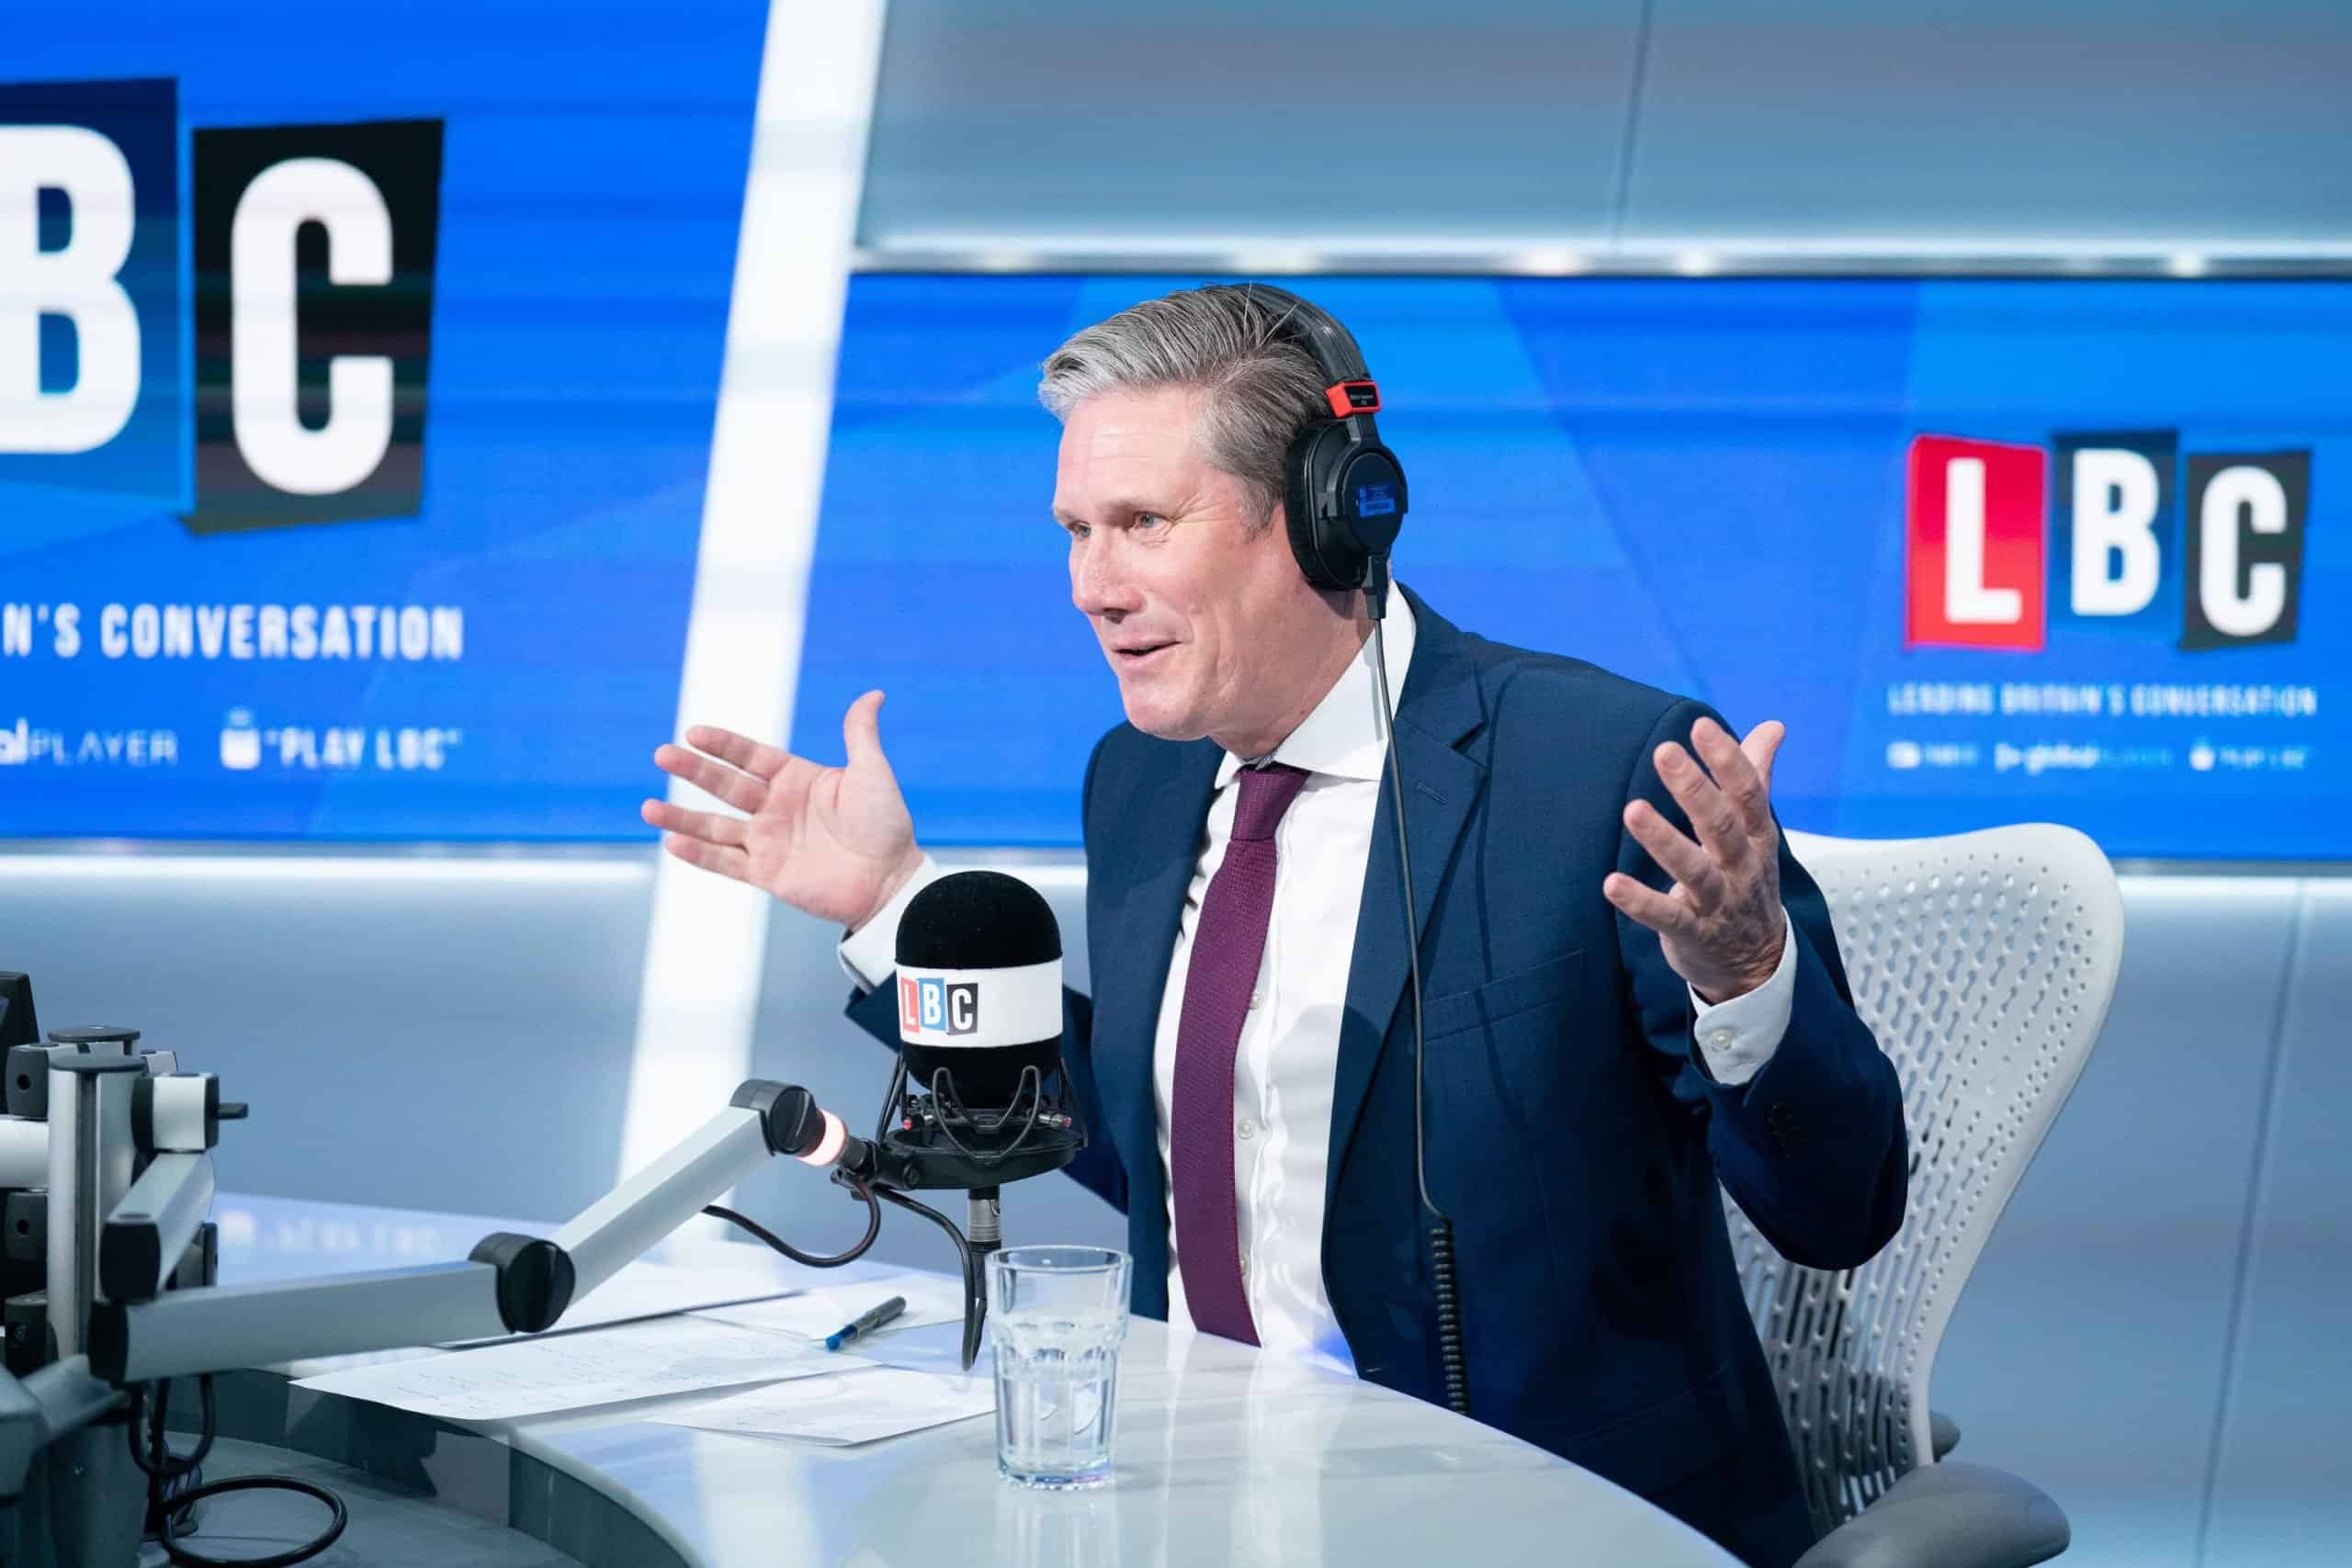 Watch: Starmer calls on Tories to act in ‘national interest’ and boot out Boris